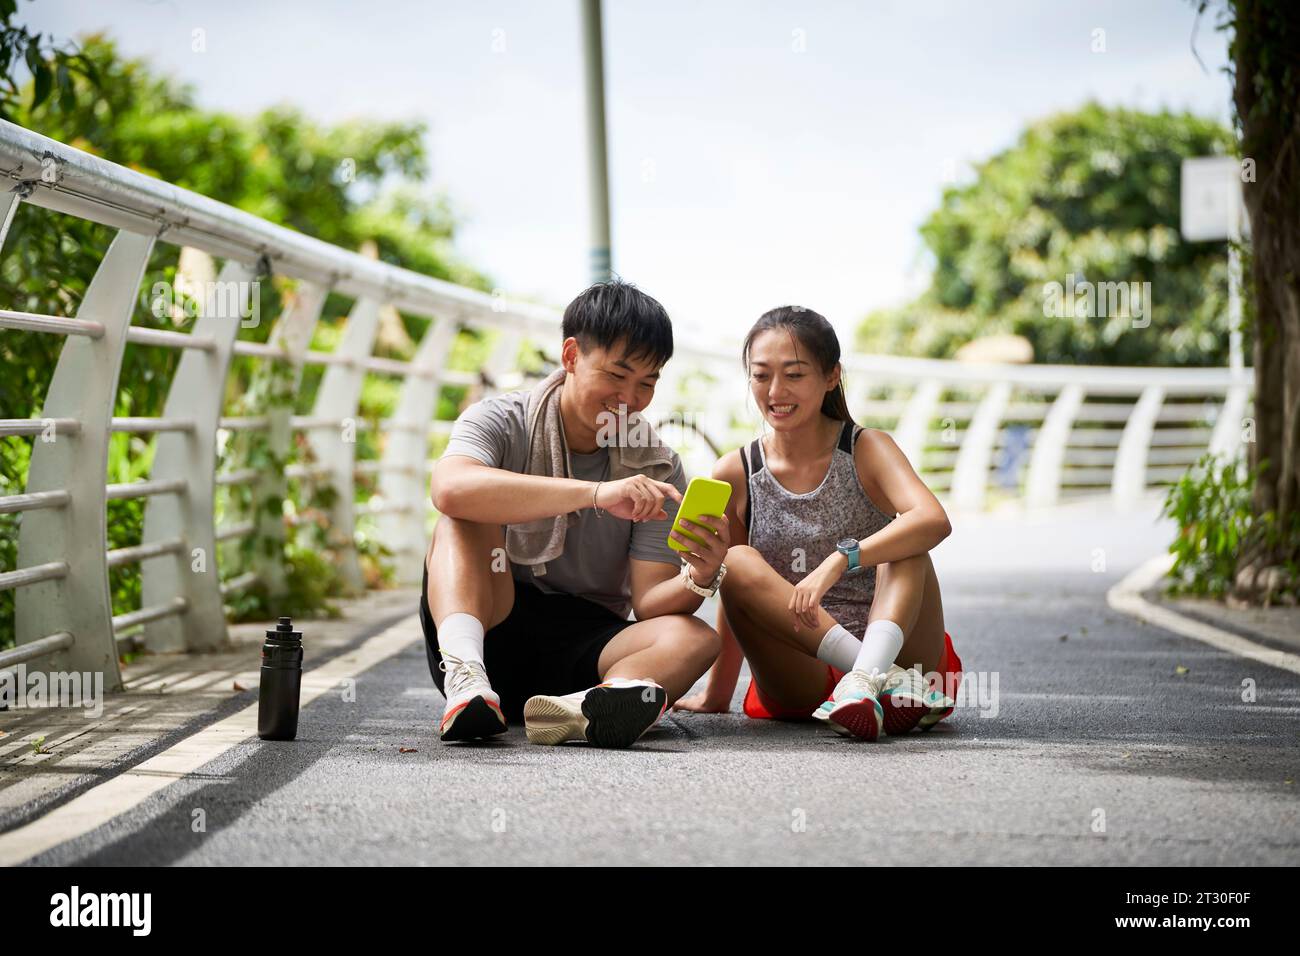 young asian couple looking at cellphone photos while taking a break during outdoor exercise Stock Photo